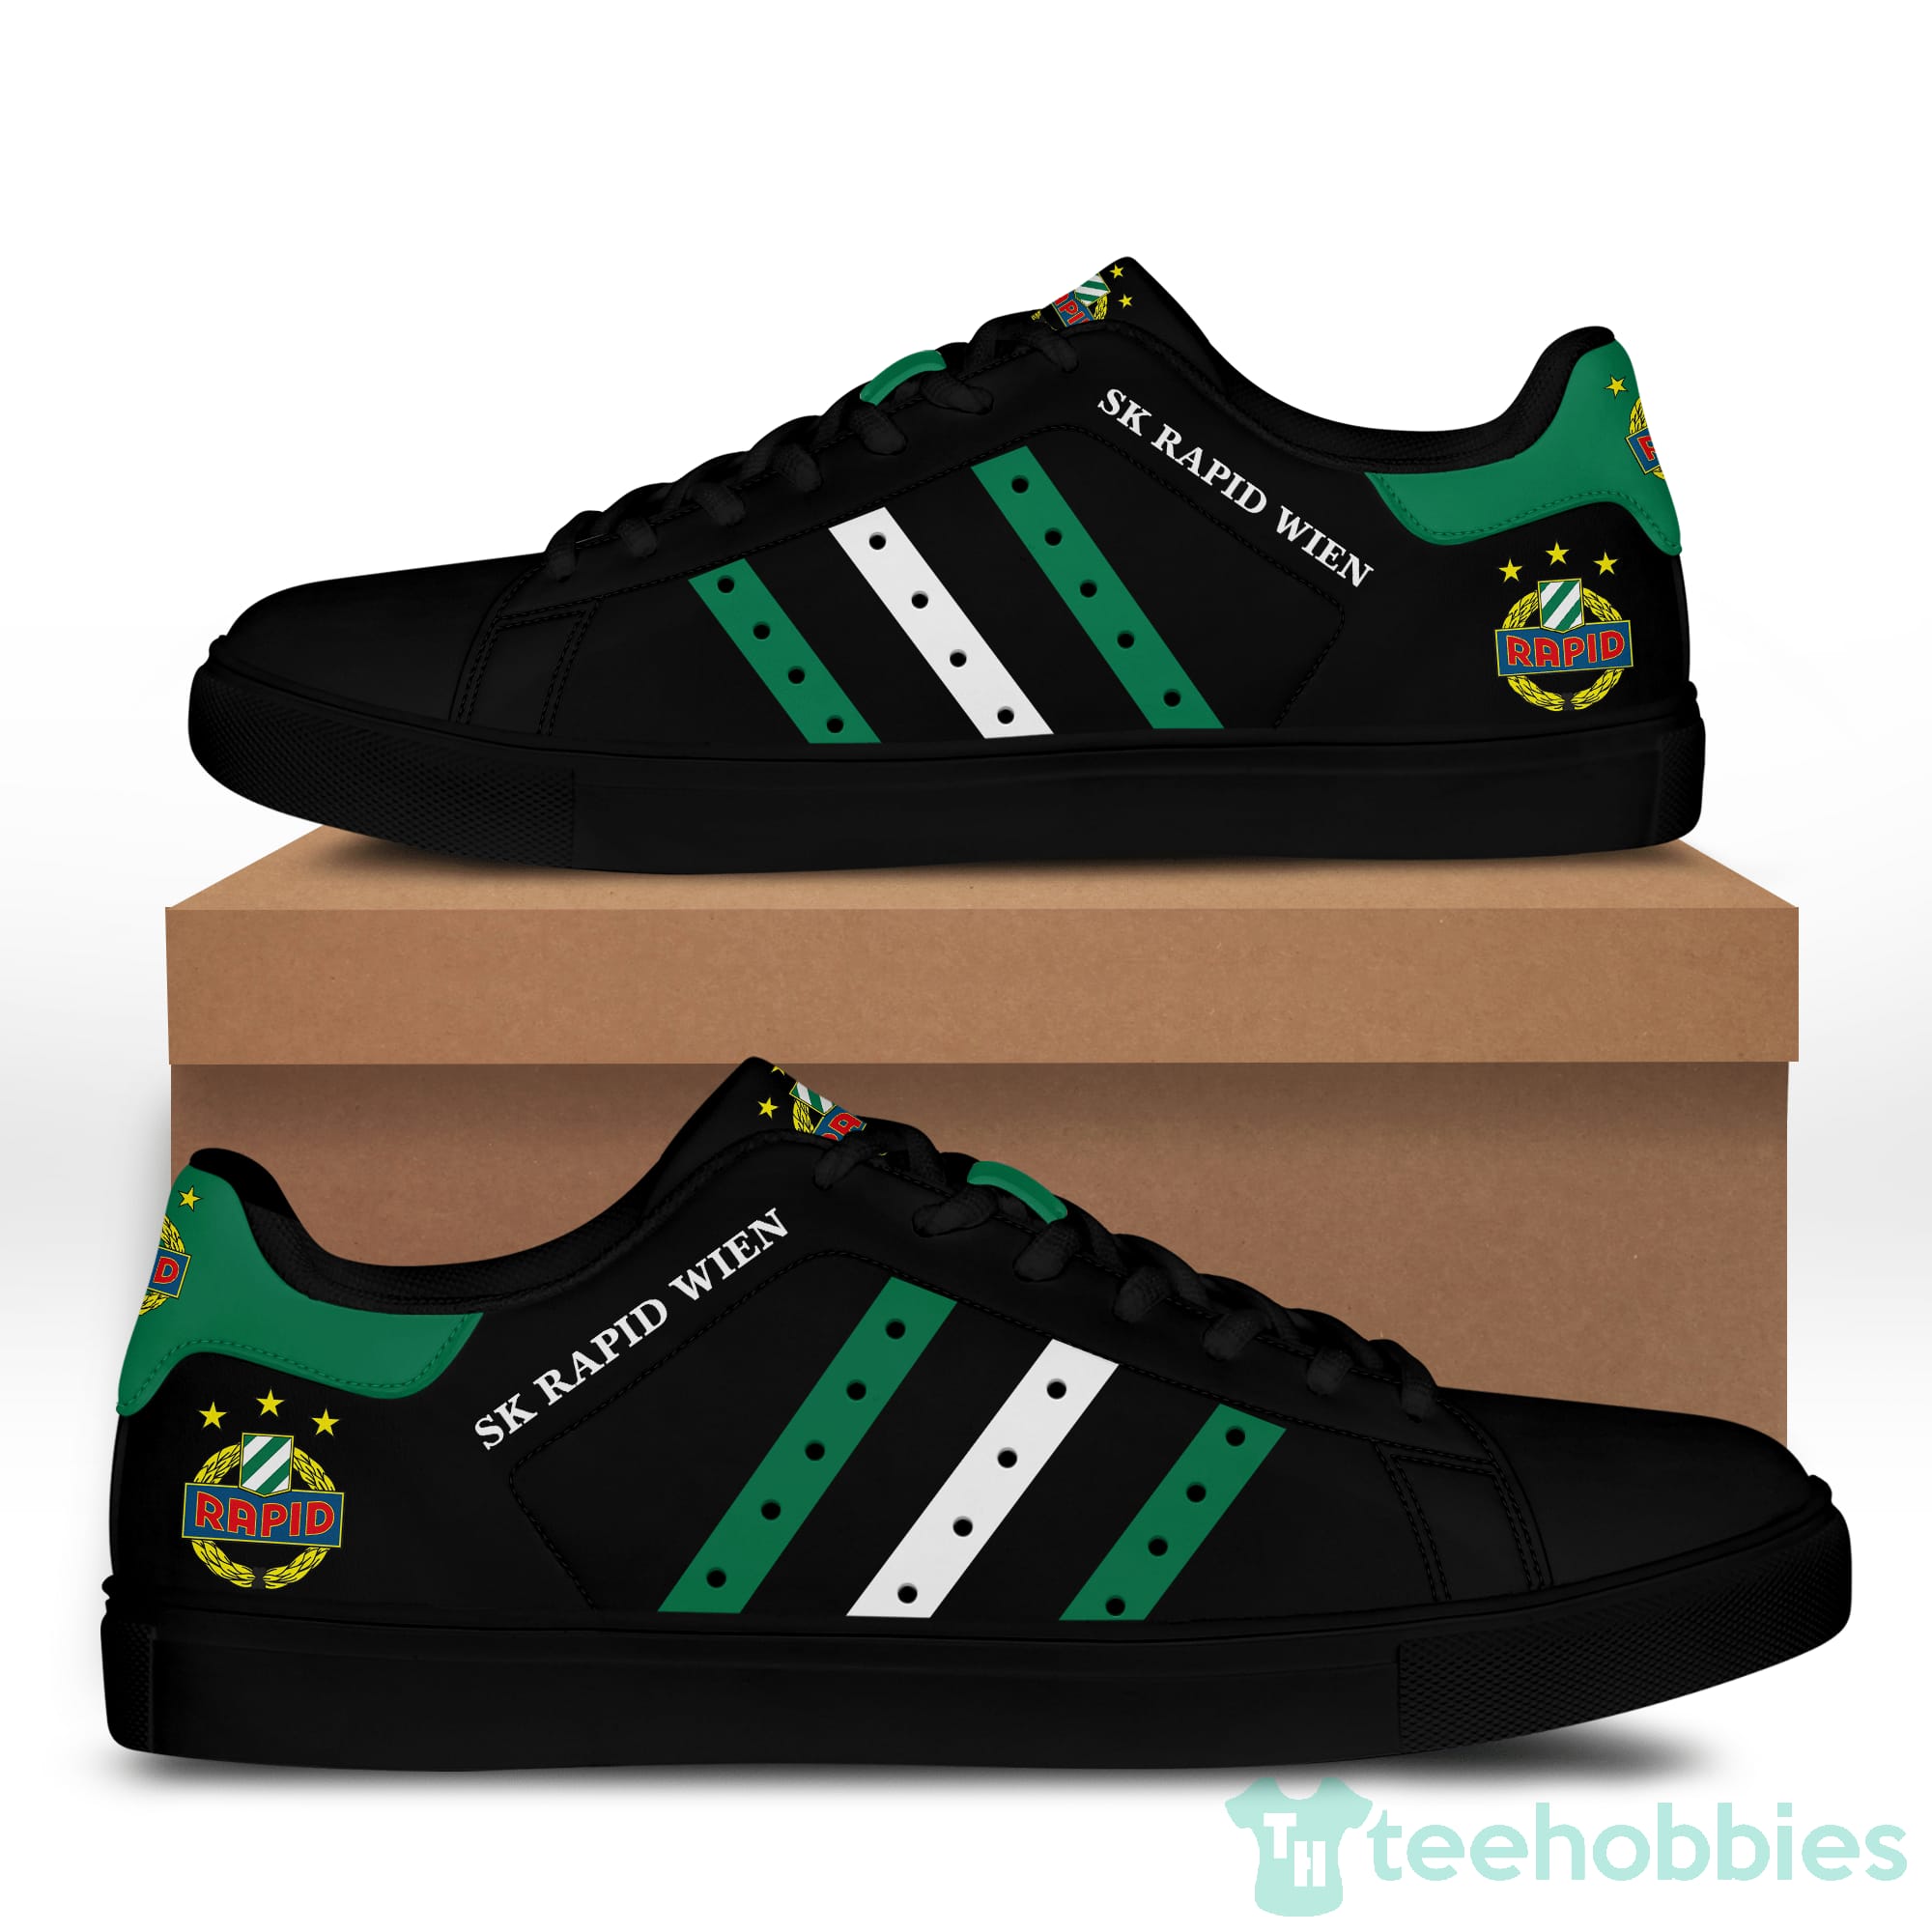 Sk Rapid Wien black And Green Low Top Skate Shoes